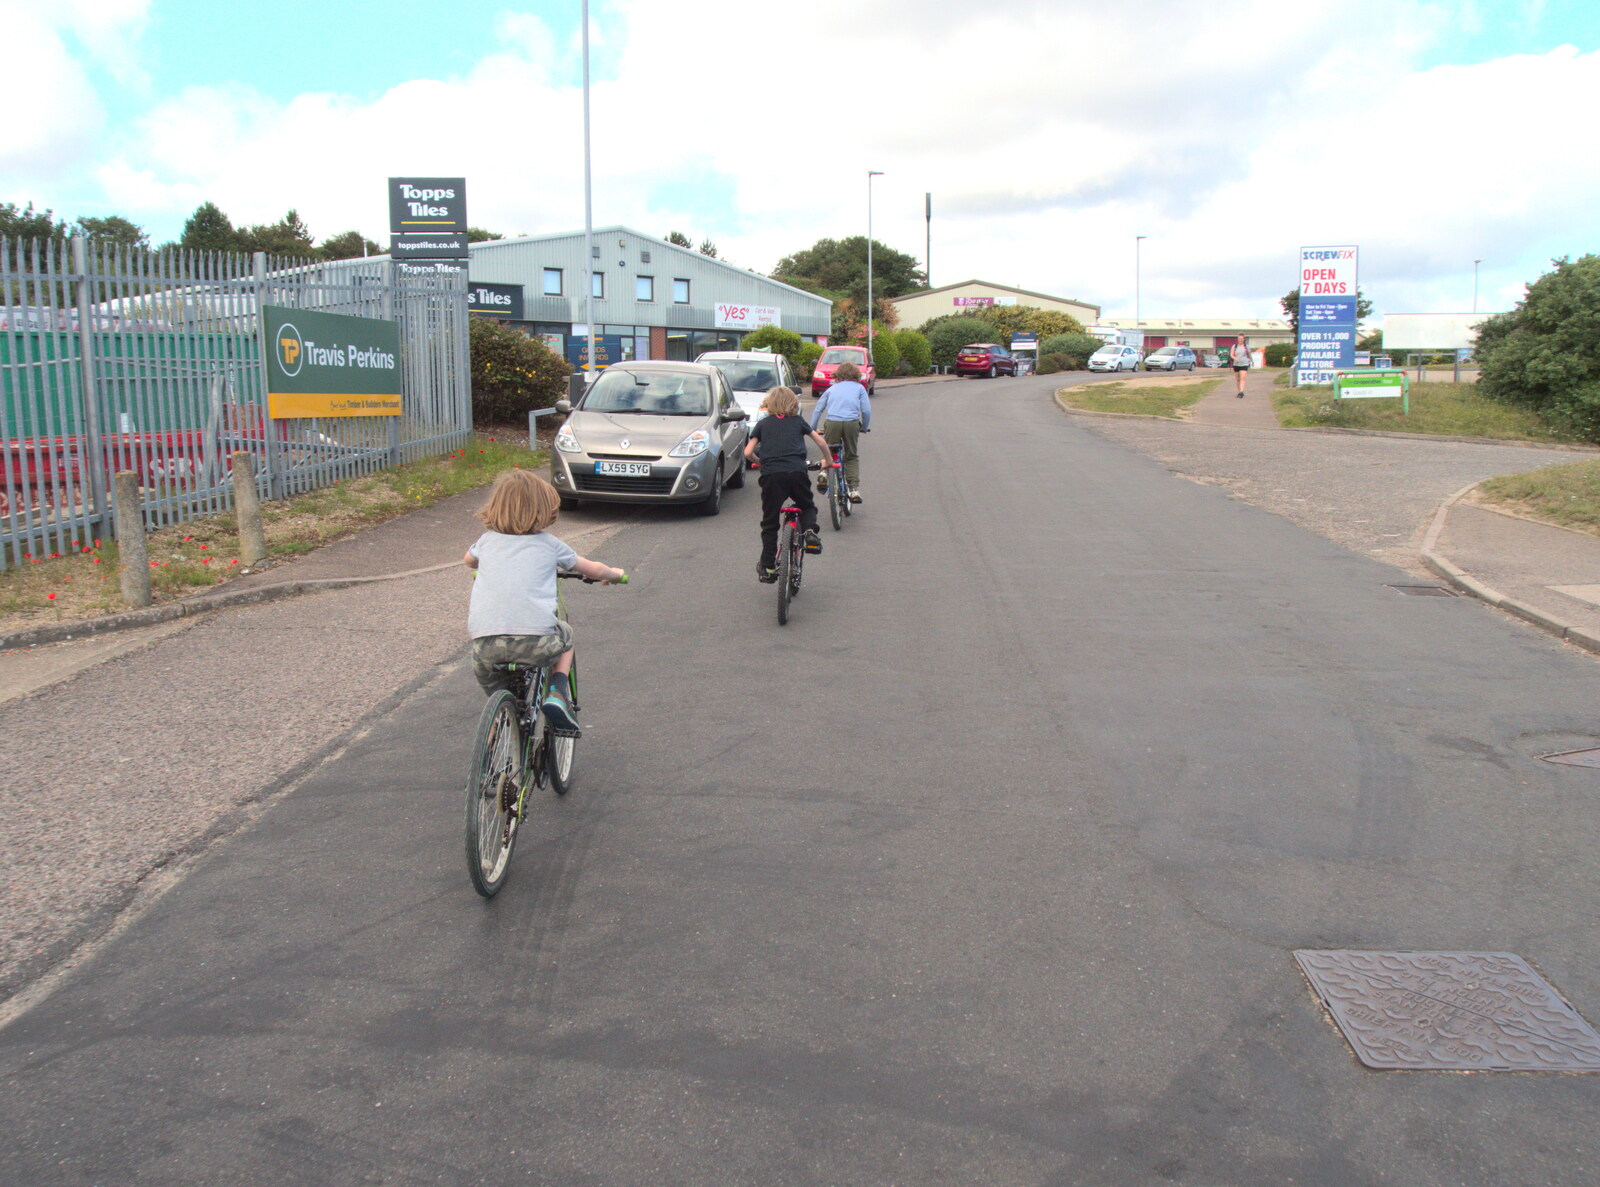 We cycle through an industrial estate near Cromer from Camping on the Coast, East Runton, North Norfolk - 25th July 2020